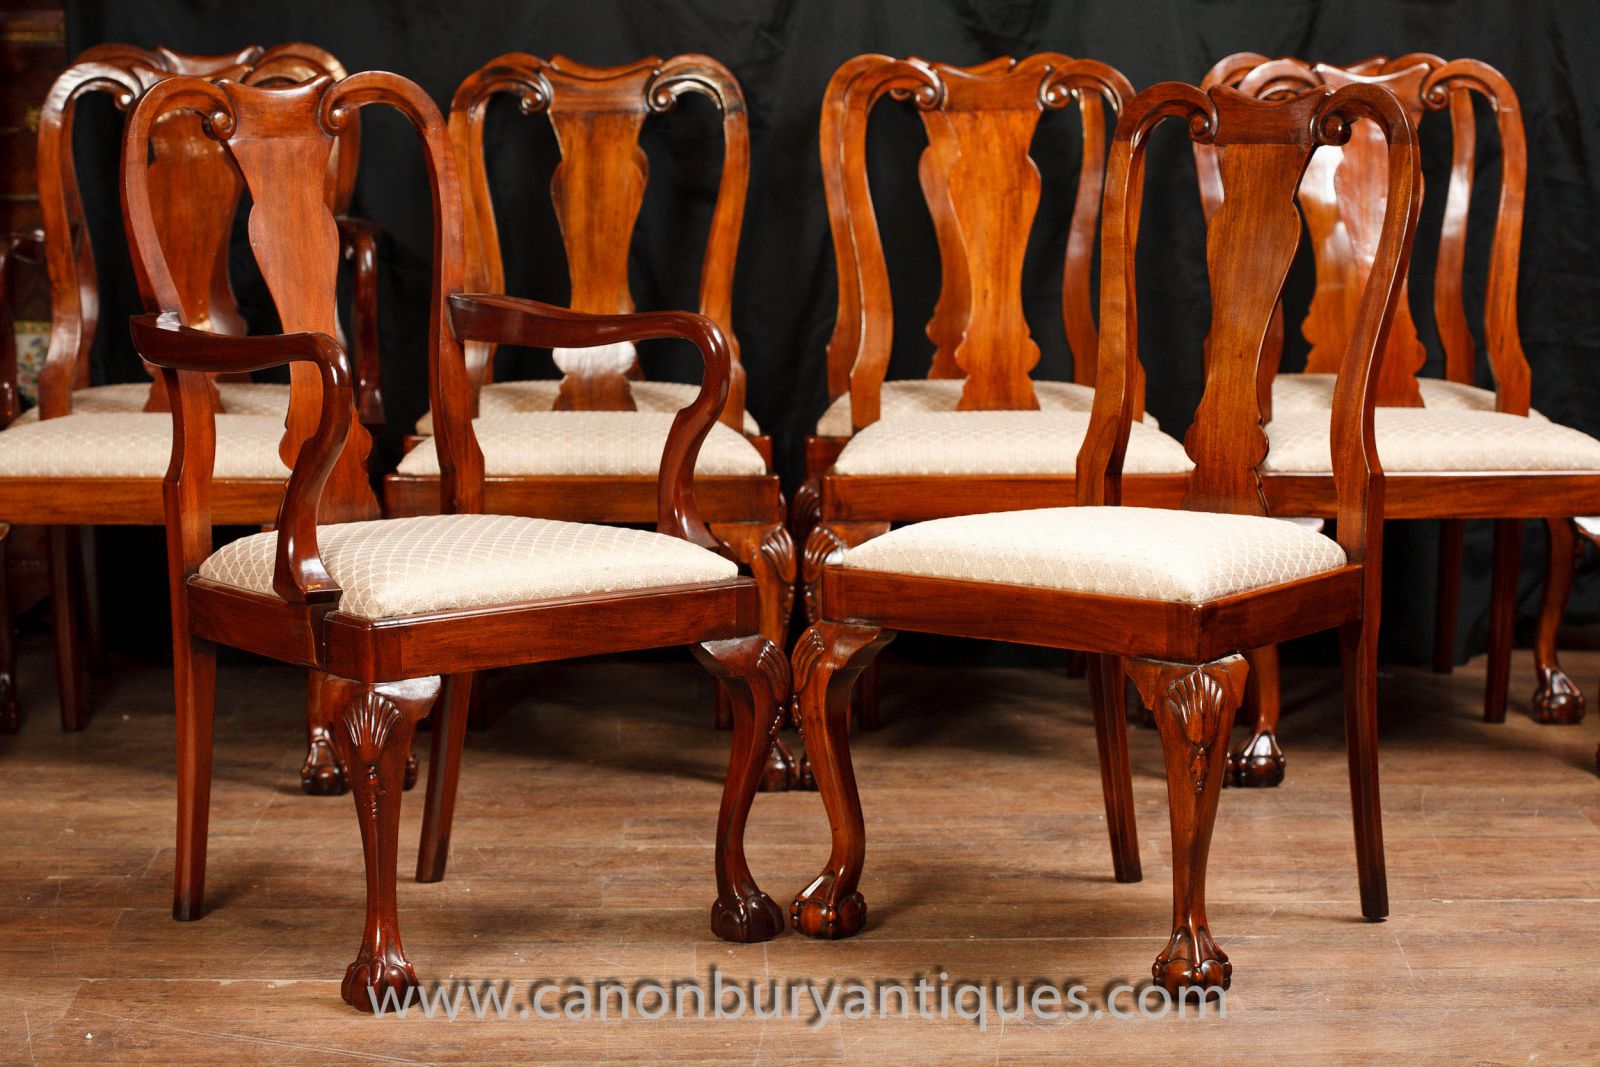 Queen Anne dining chairs in walnut